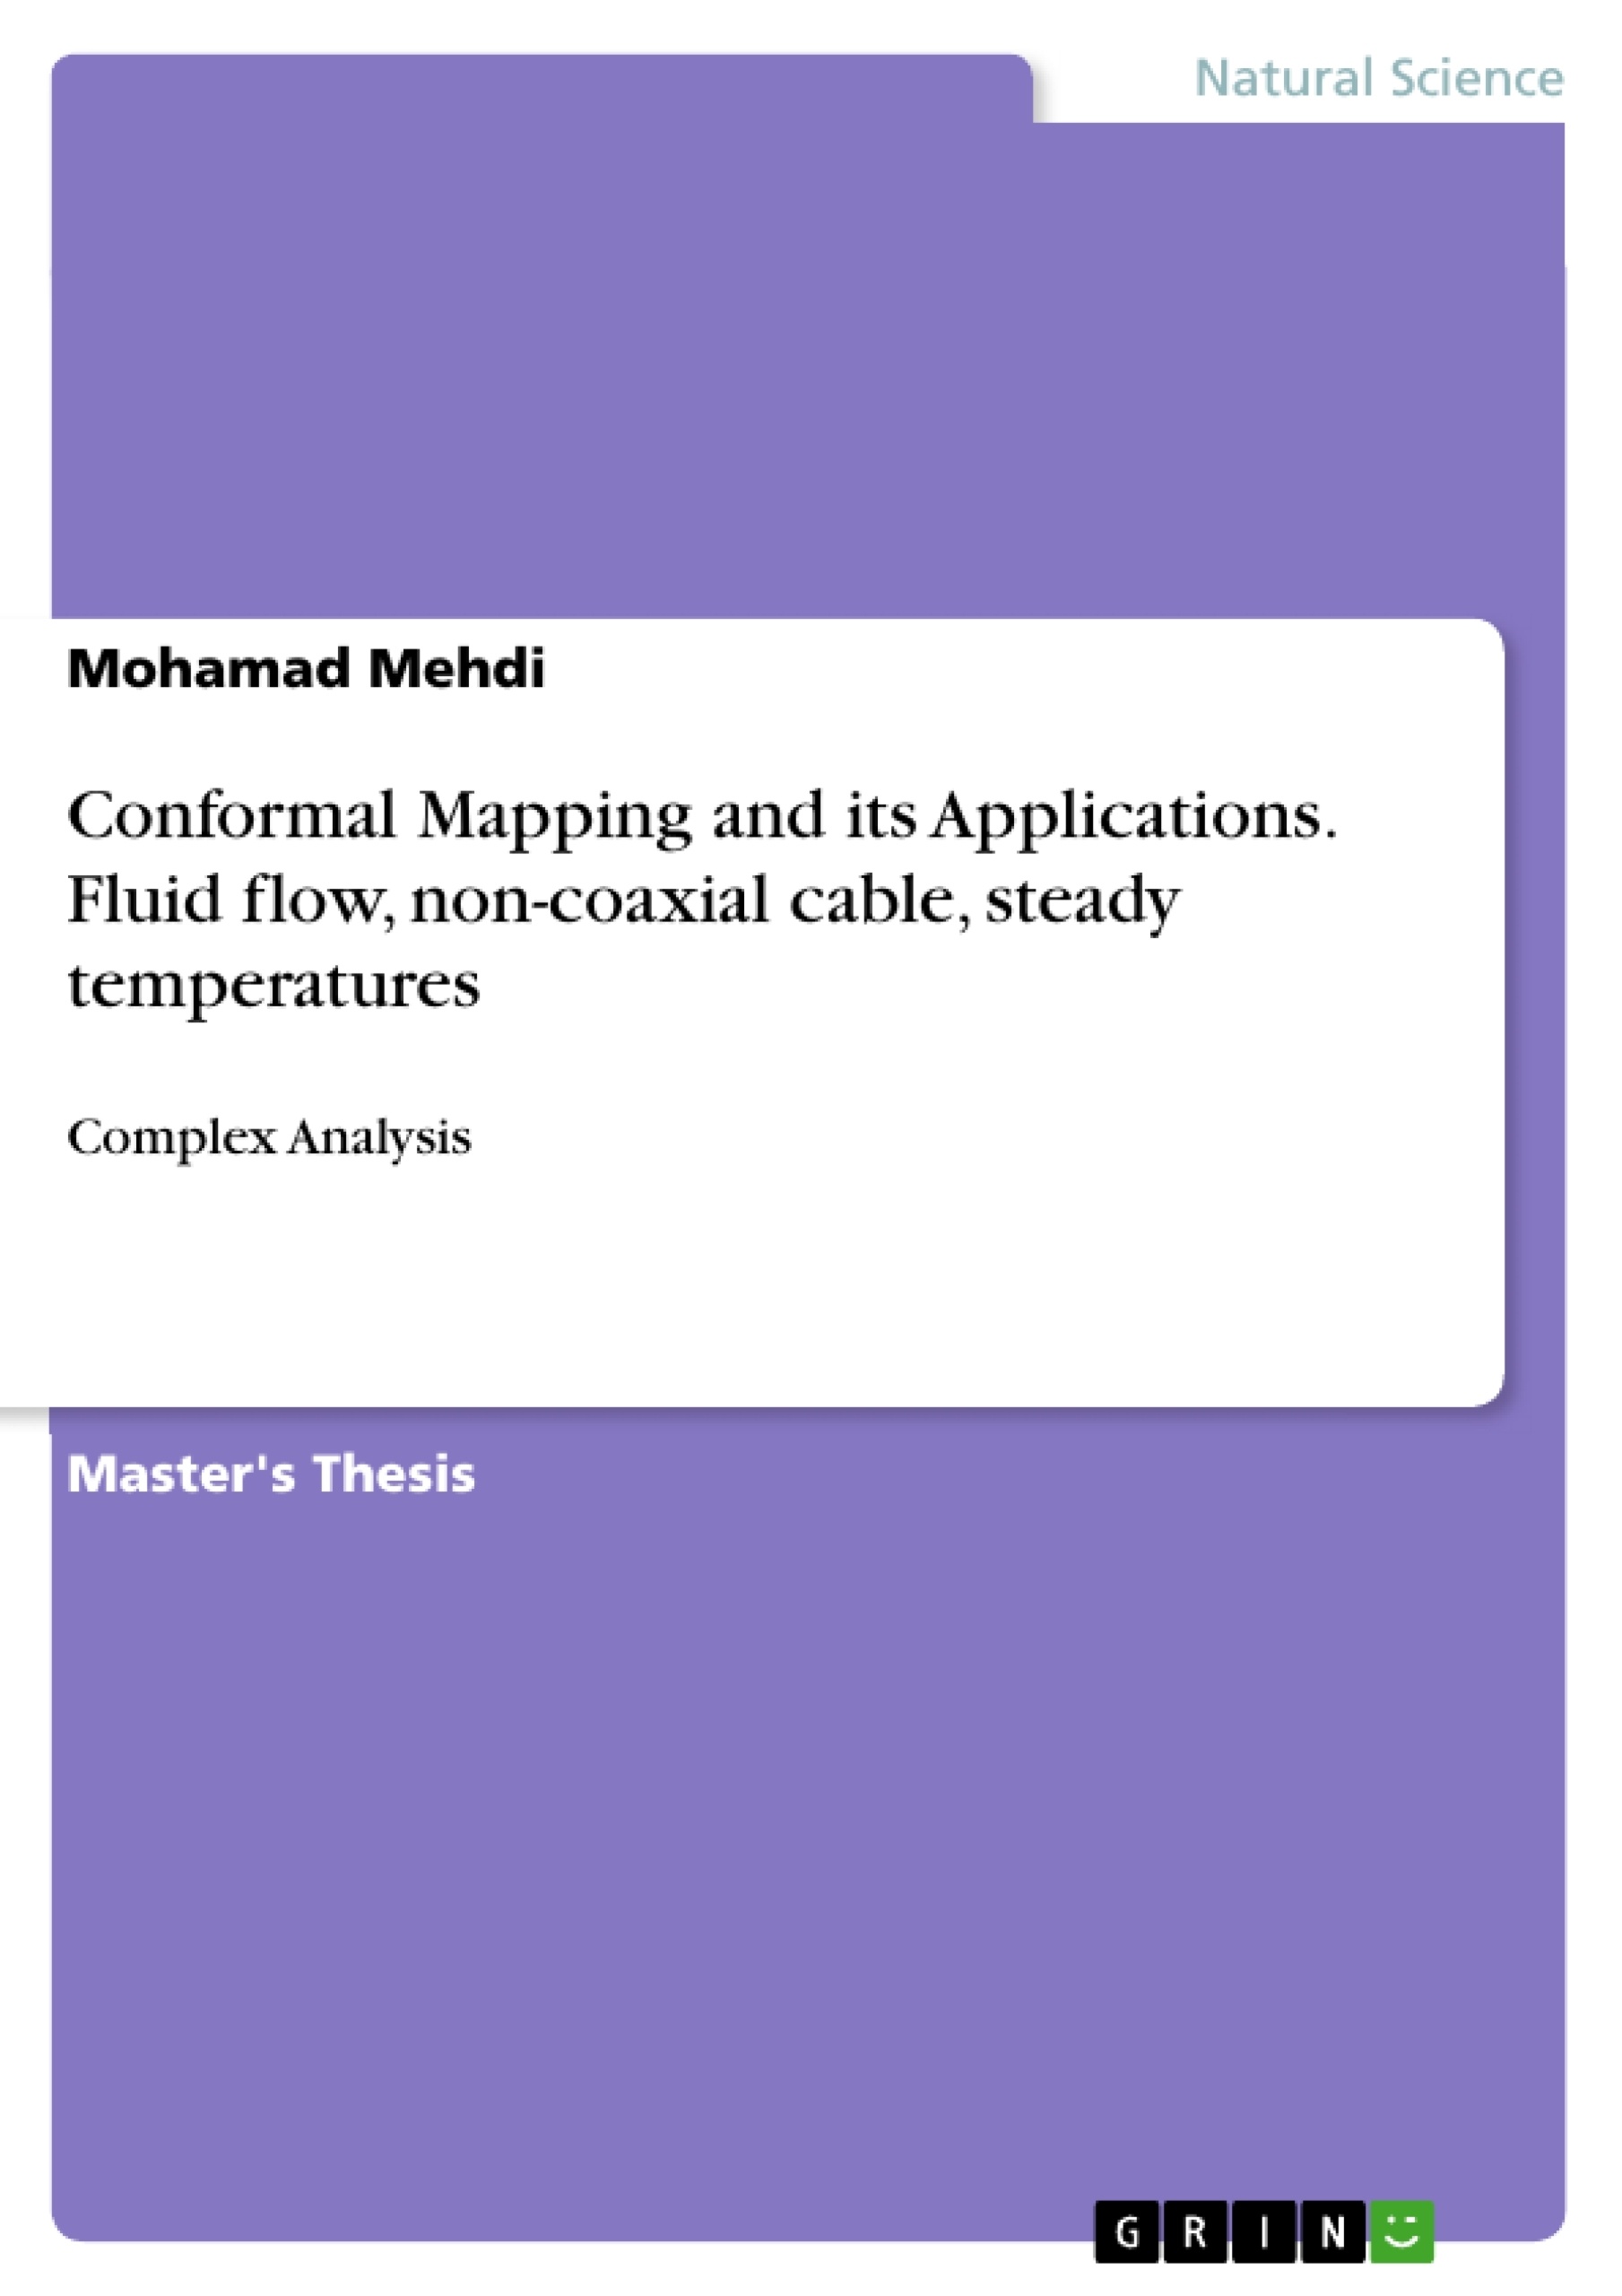 Title: Conformal Mapping and its Applications. Fluid flow, non-coaxial cable, steady temperatures